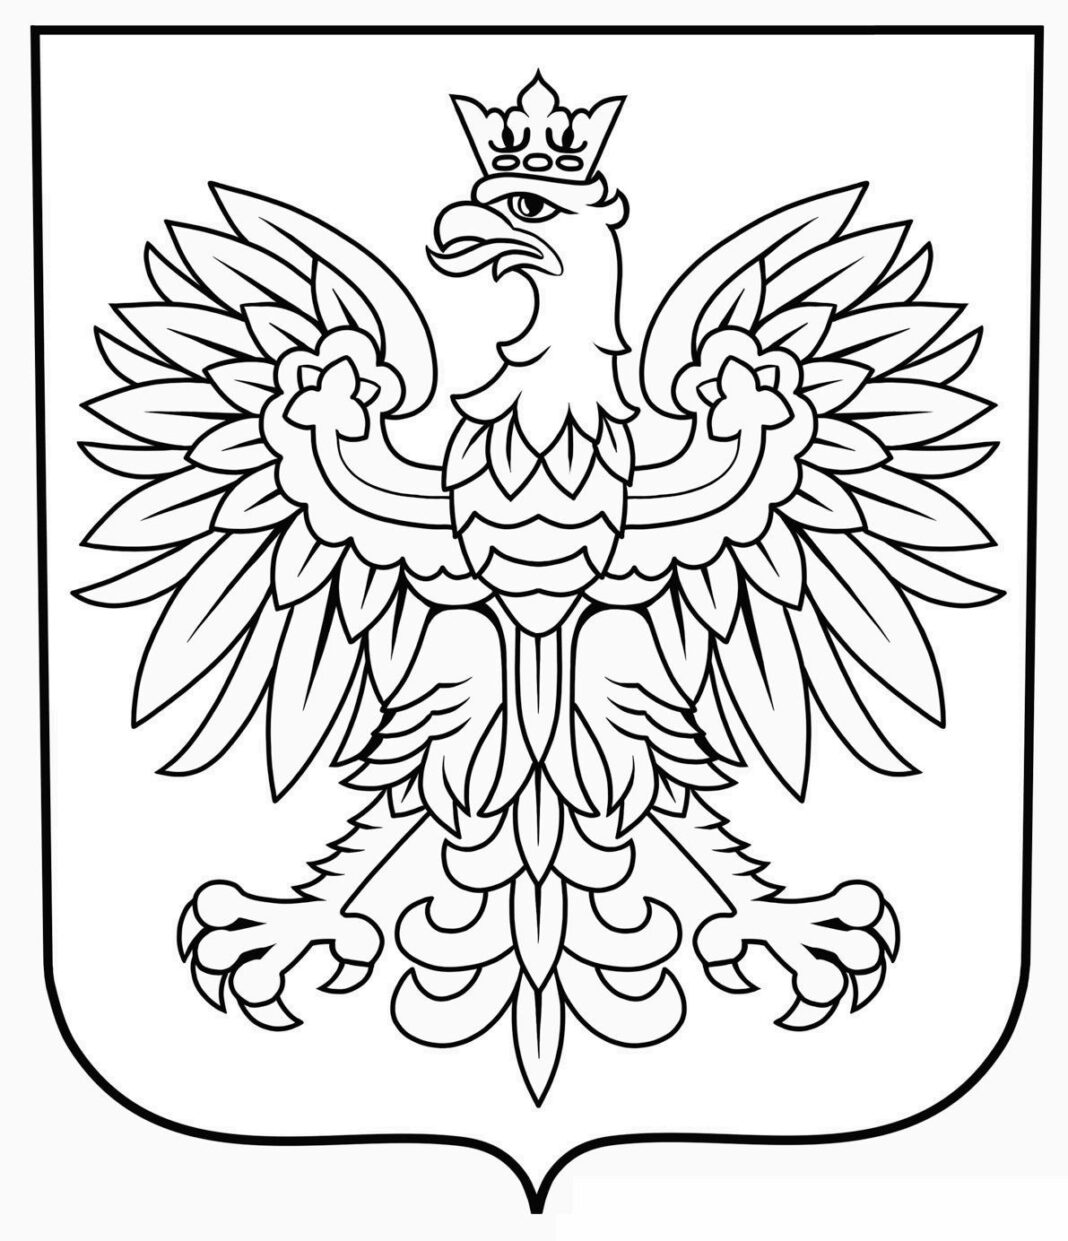 eagle polish coat of arms coloring book to print